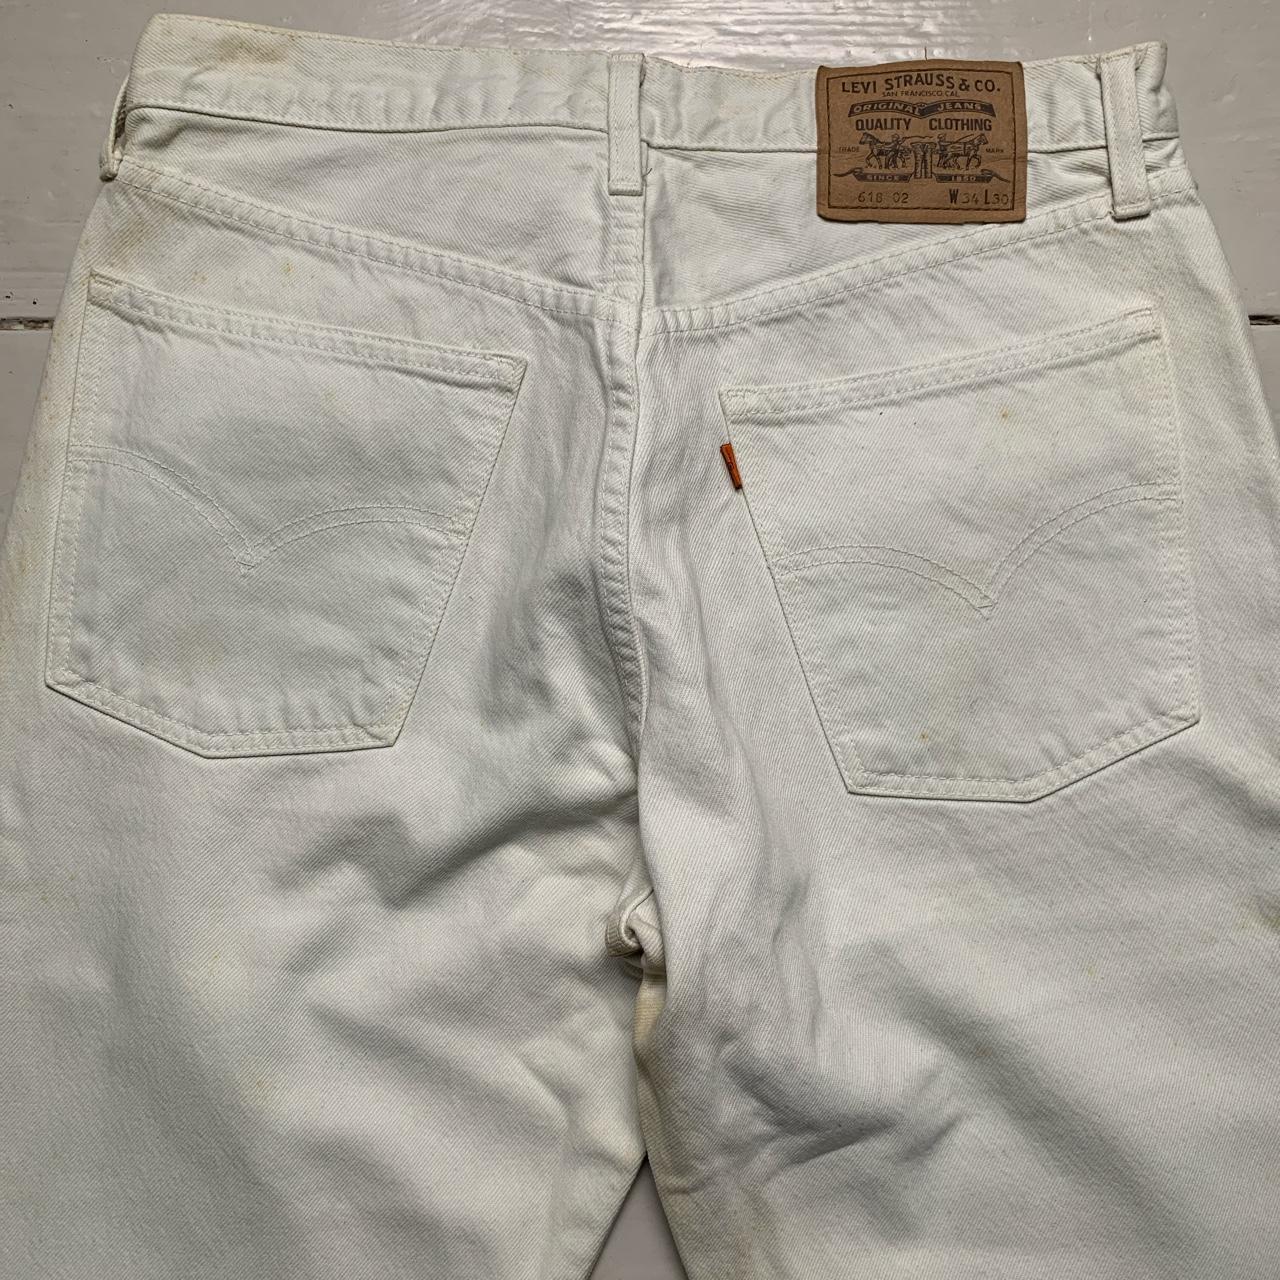 Levis 618 02 Vintage White Jeans 🔥 yellowing... - Depop